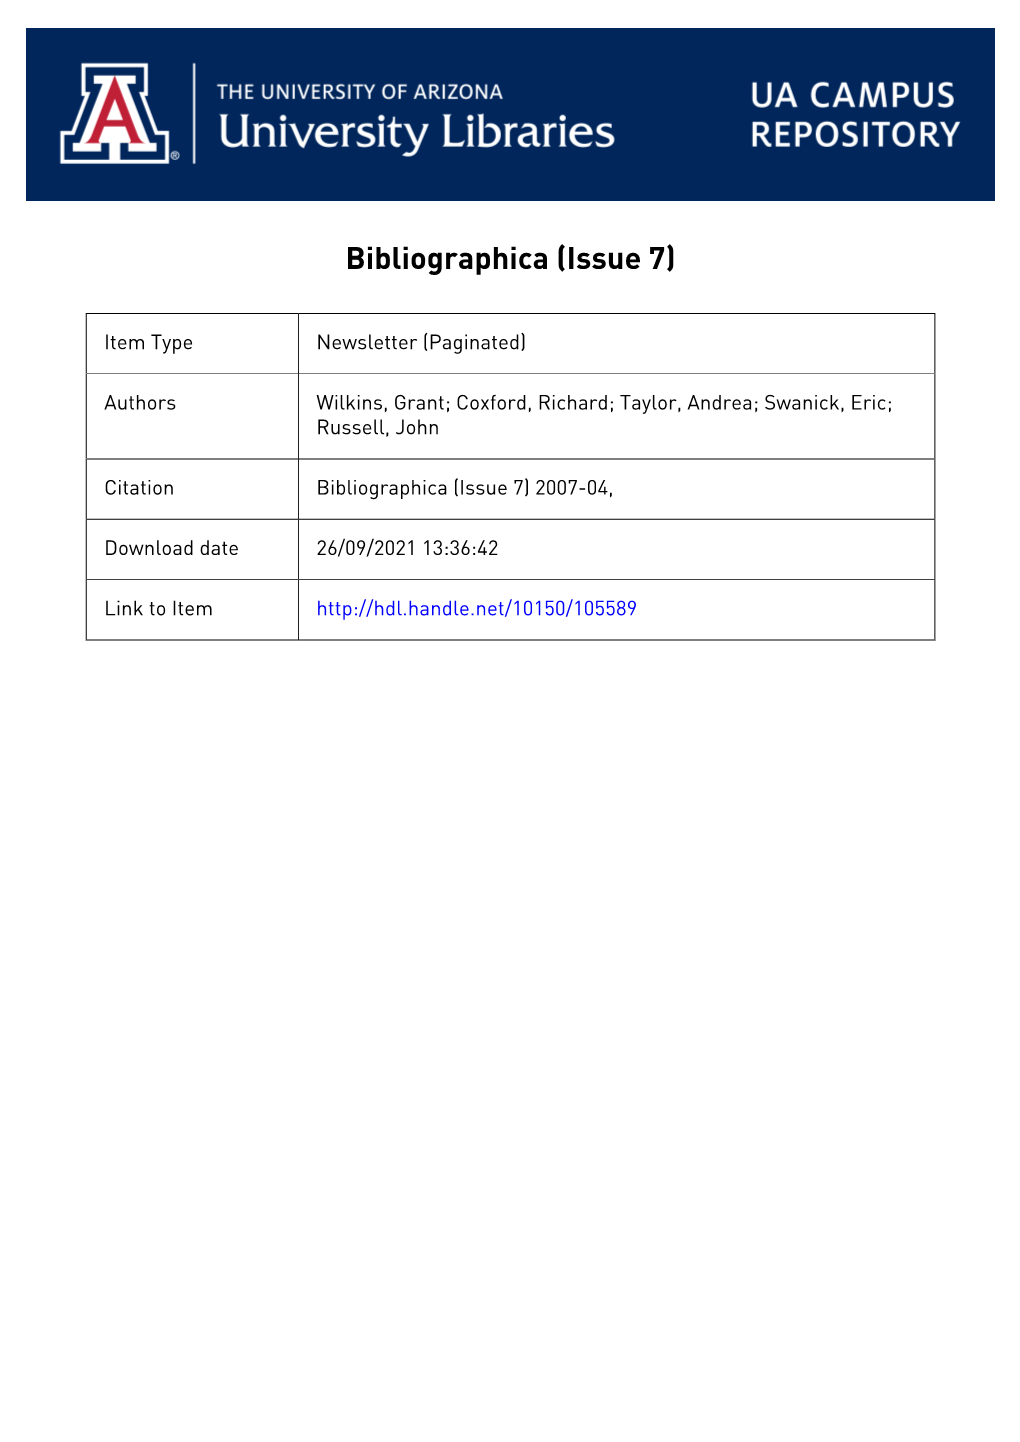 Bibliographica (Issue 7)